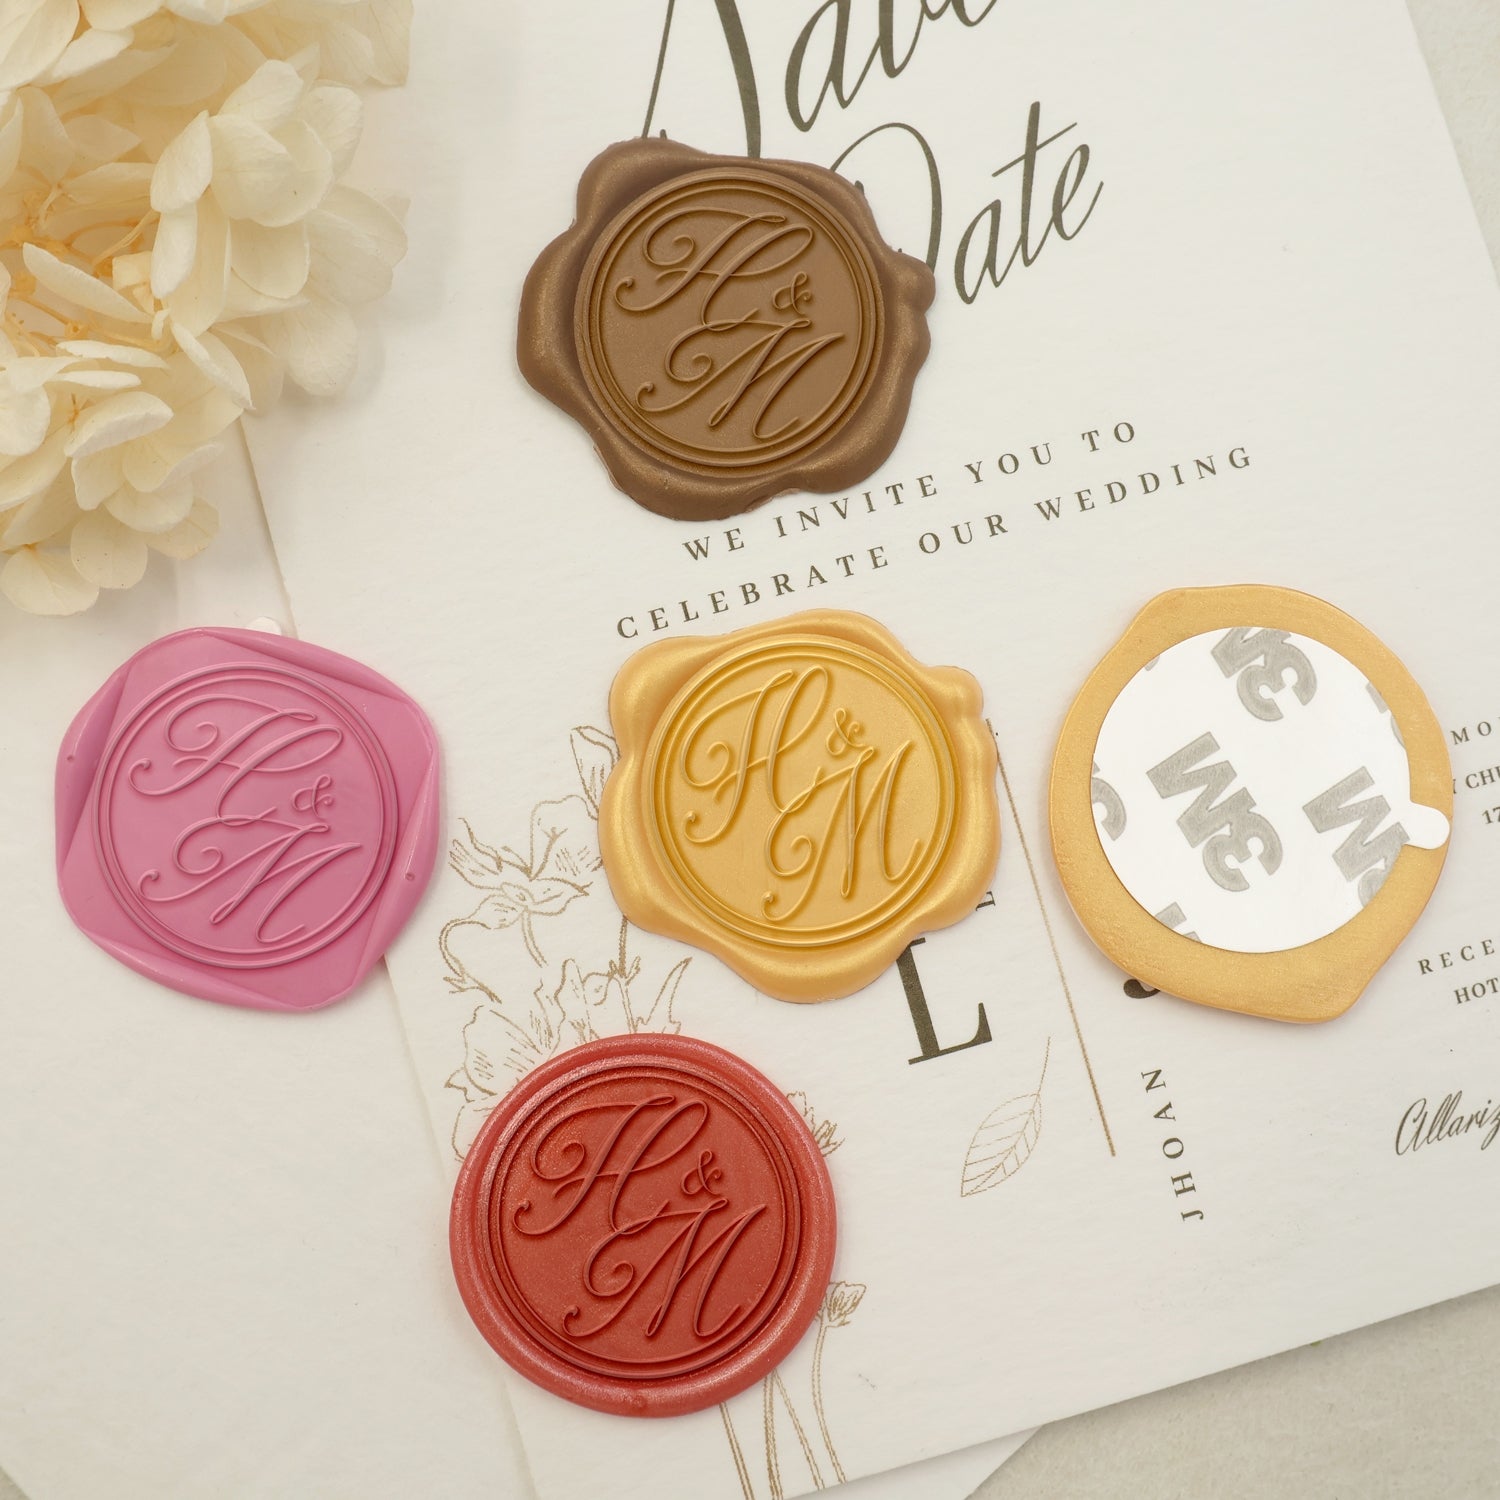 Wedding Wax Seal Stickers - Wedding Custom Self Adhesive Wax Seal Sticker with Double initials / Couple's Names